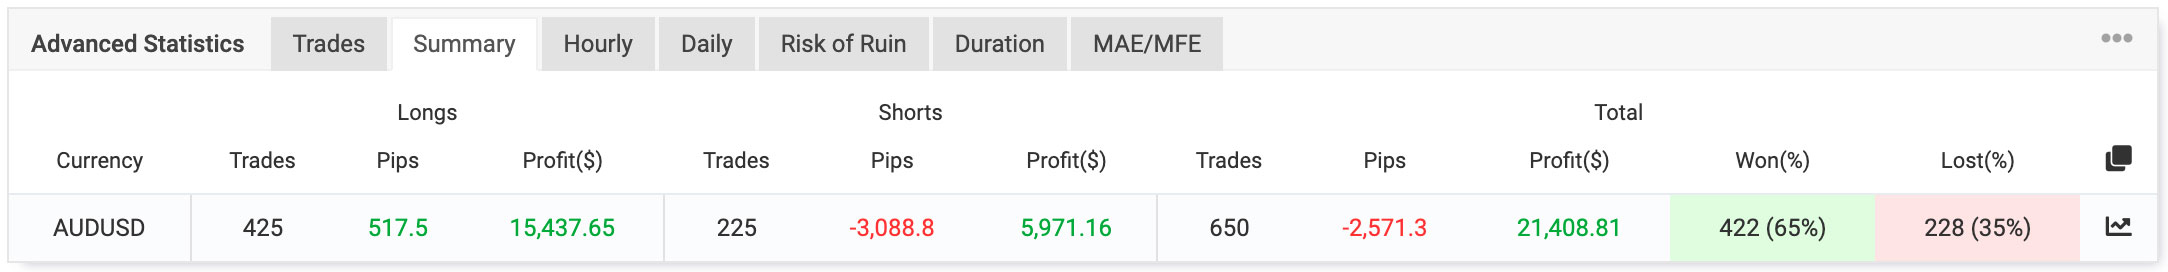 MyForexPath EA live trading results from Myfxbook